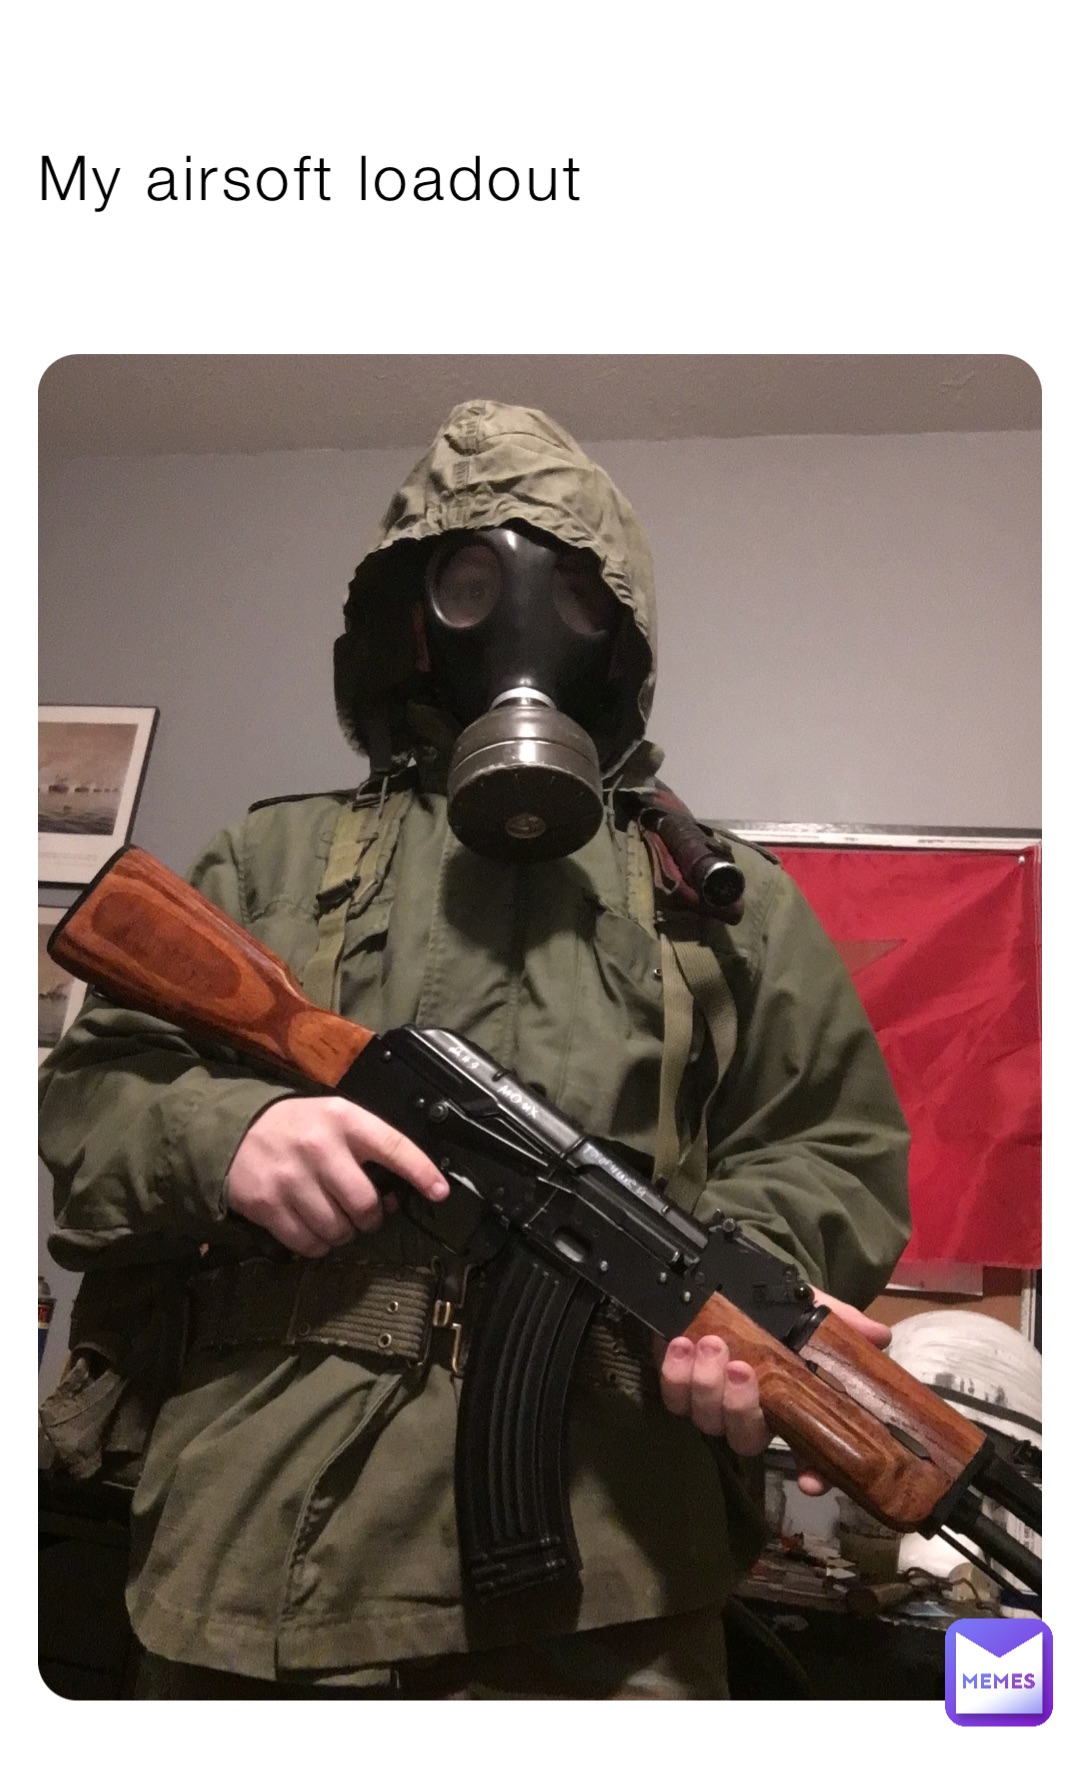 My airsoft loadout